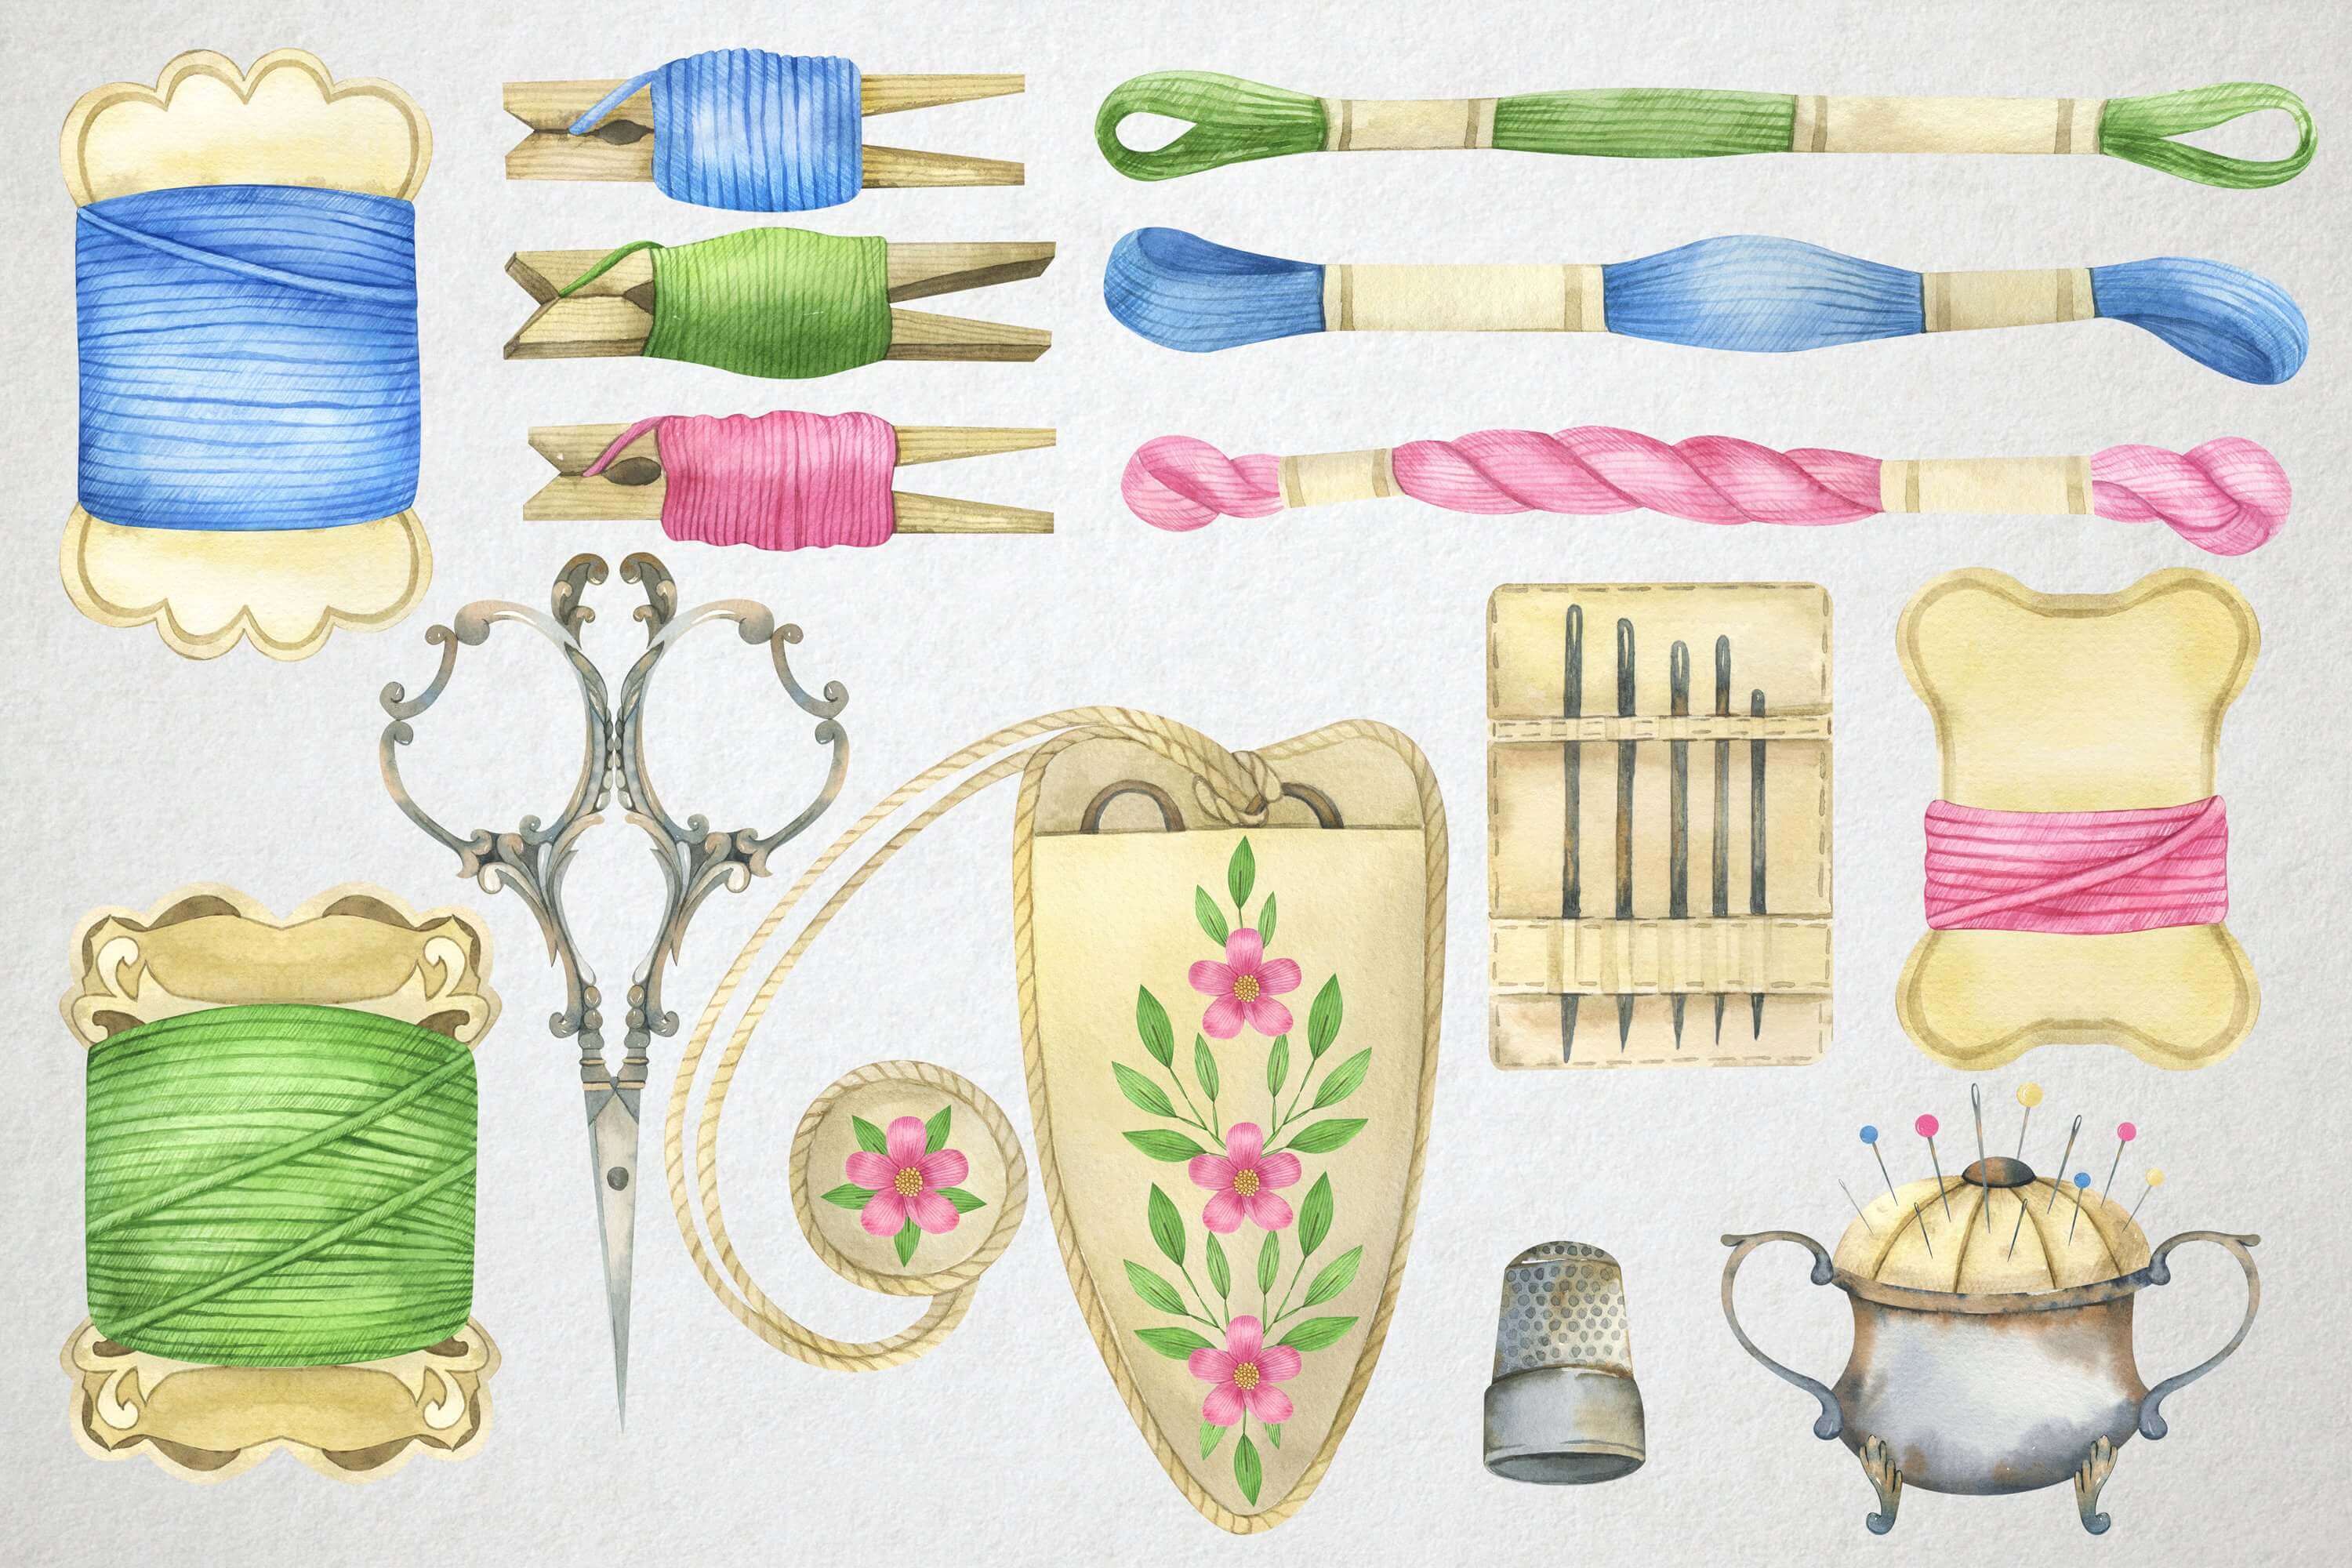 Watercolor image of many spools of thread, scissors, thimble, needles and a needle case on a light gray background.